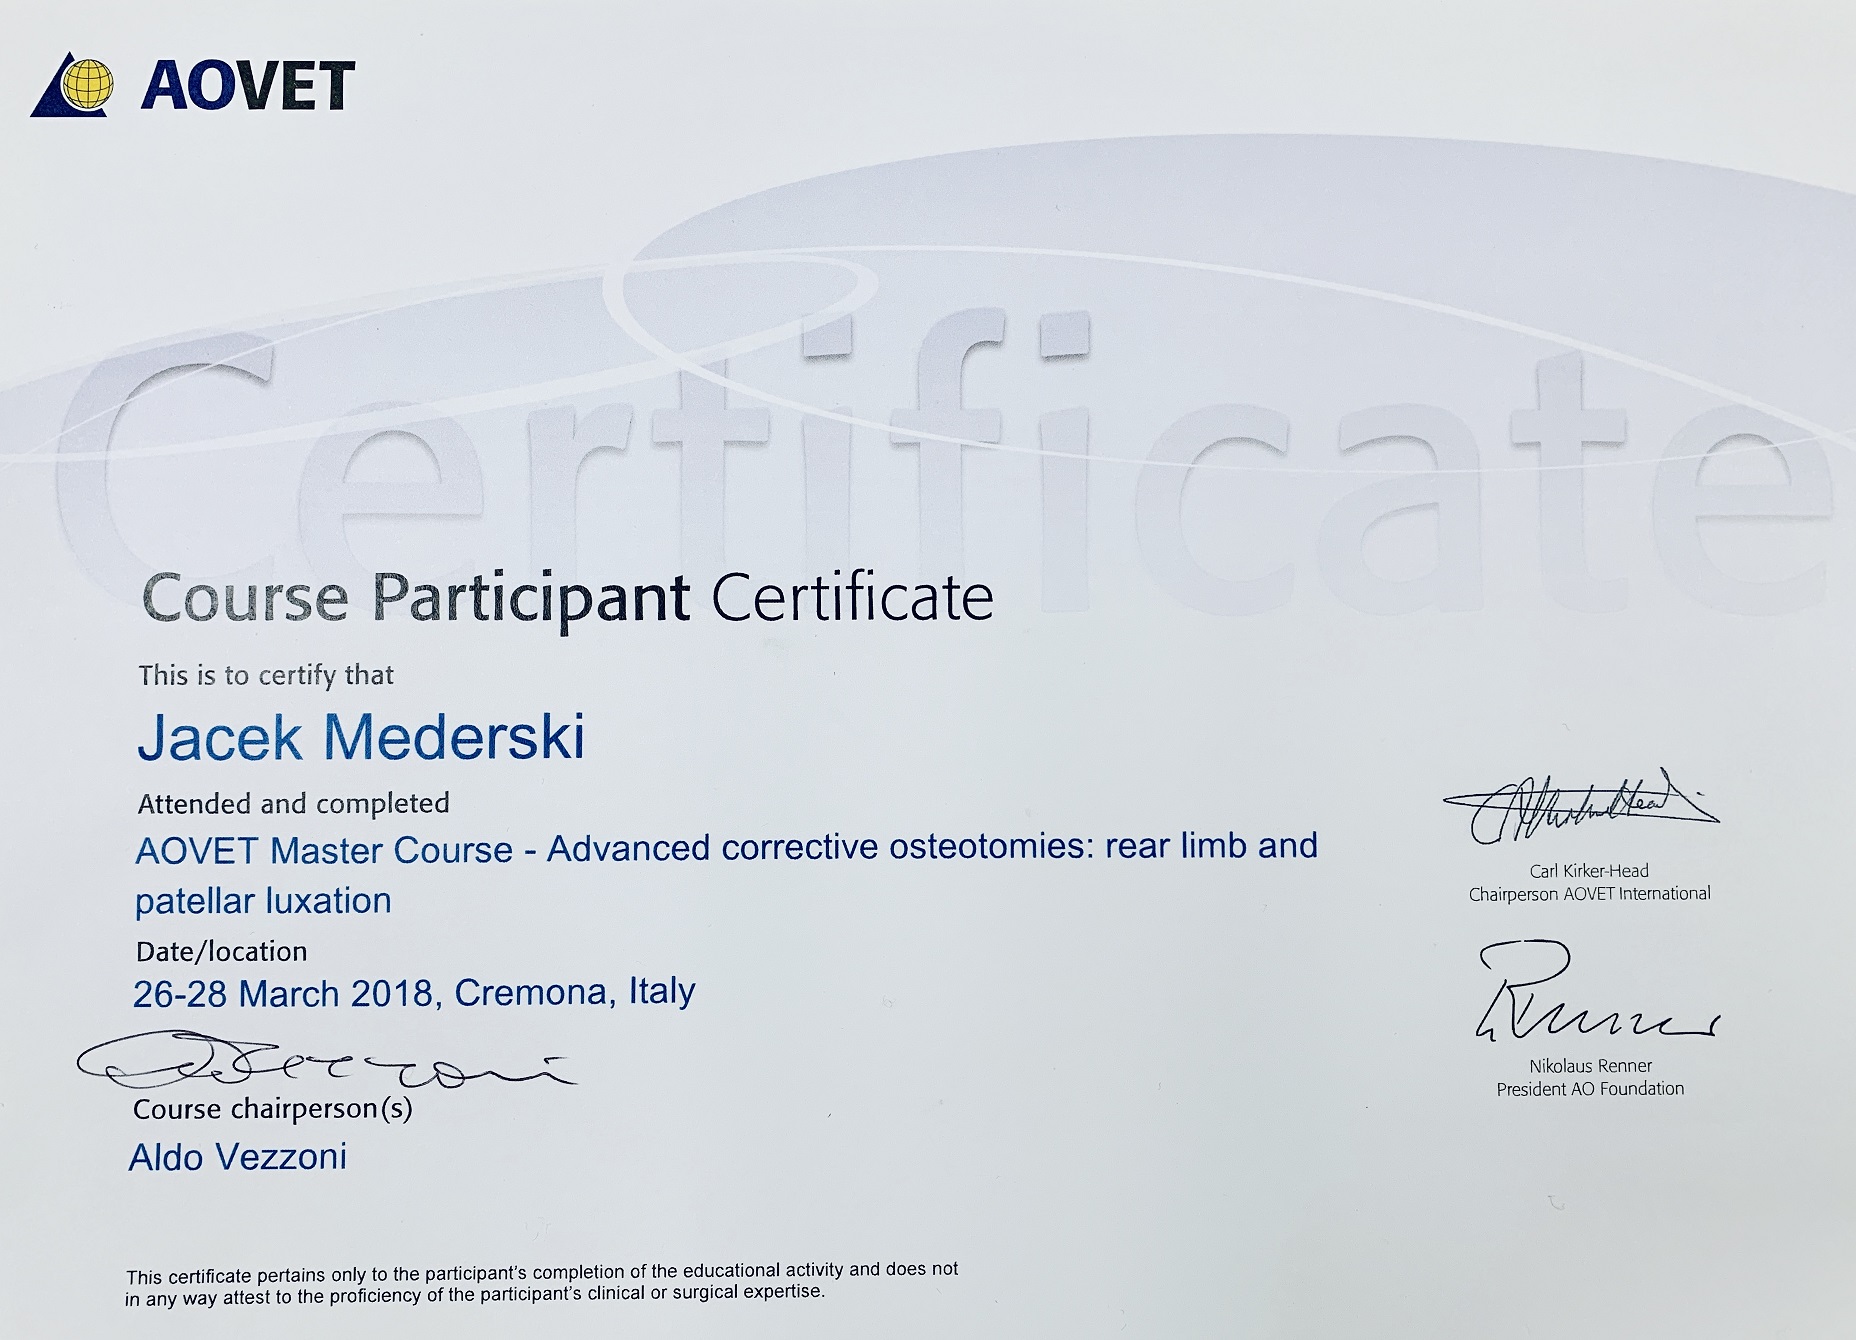 AOVET Master Course-Advanced Corrective Osteotomies: Rear Limb and Patellar Luxation - Cremona